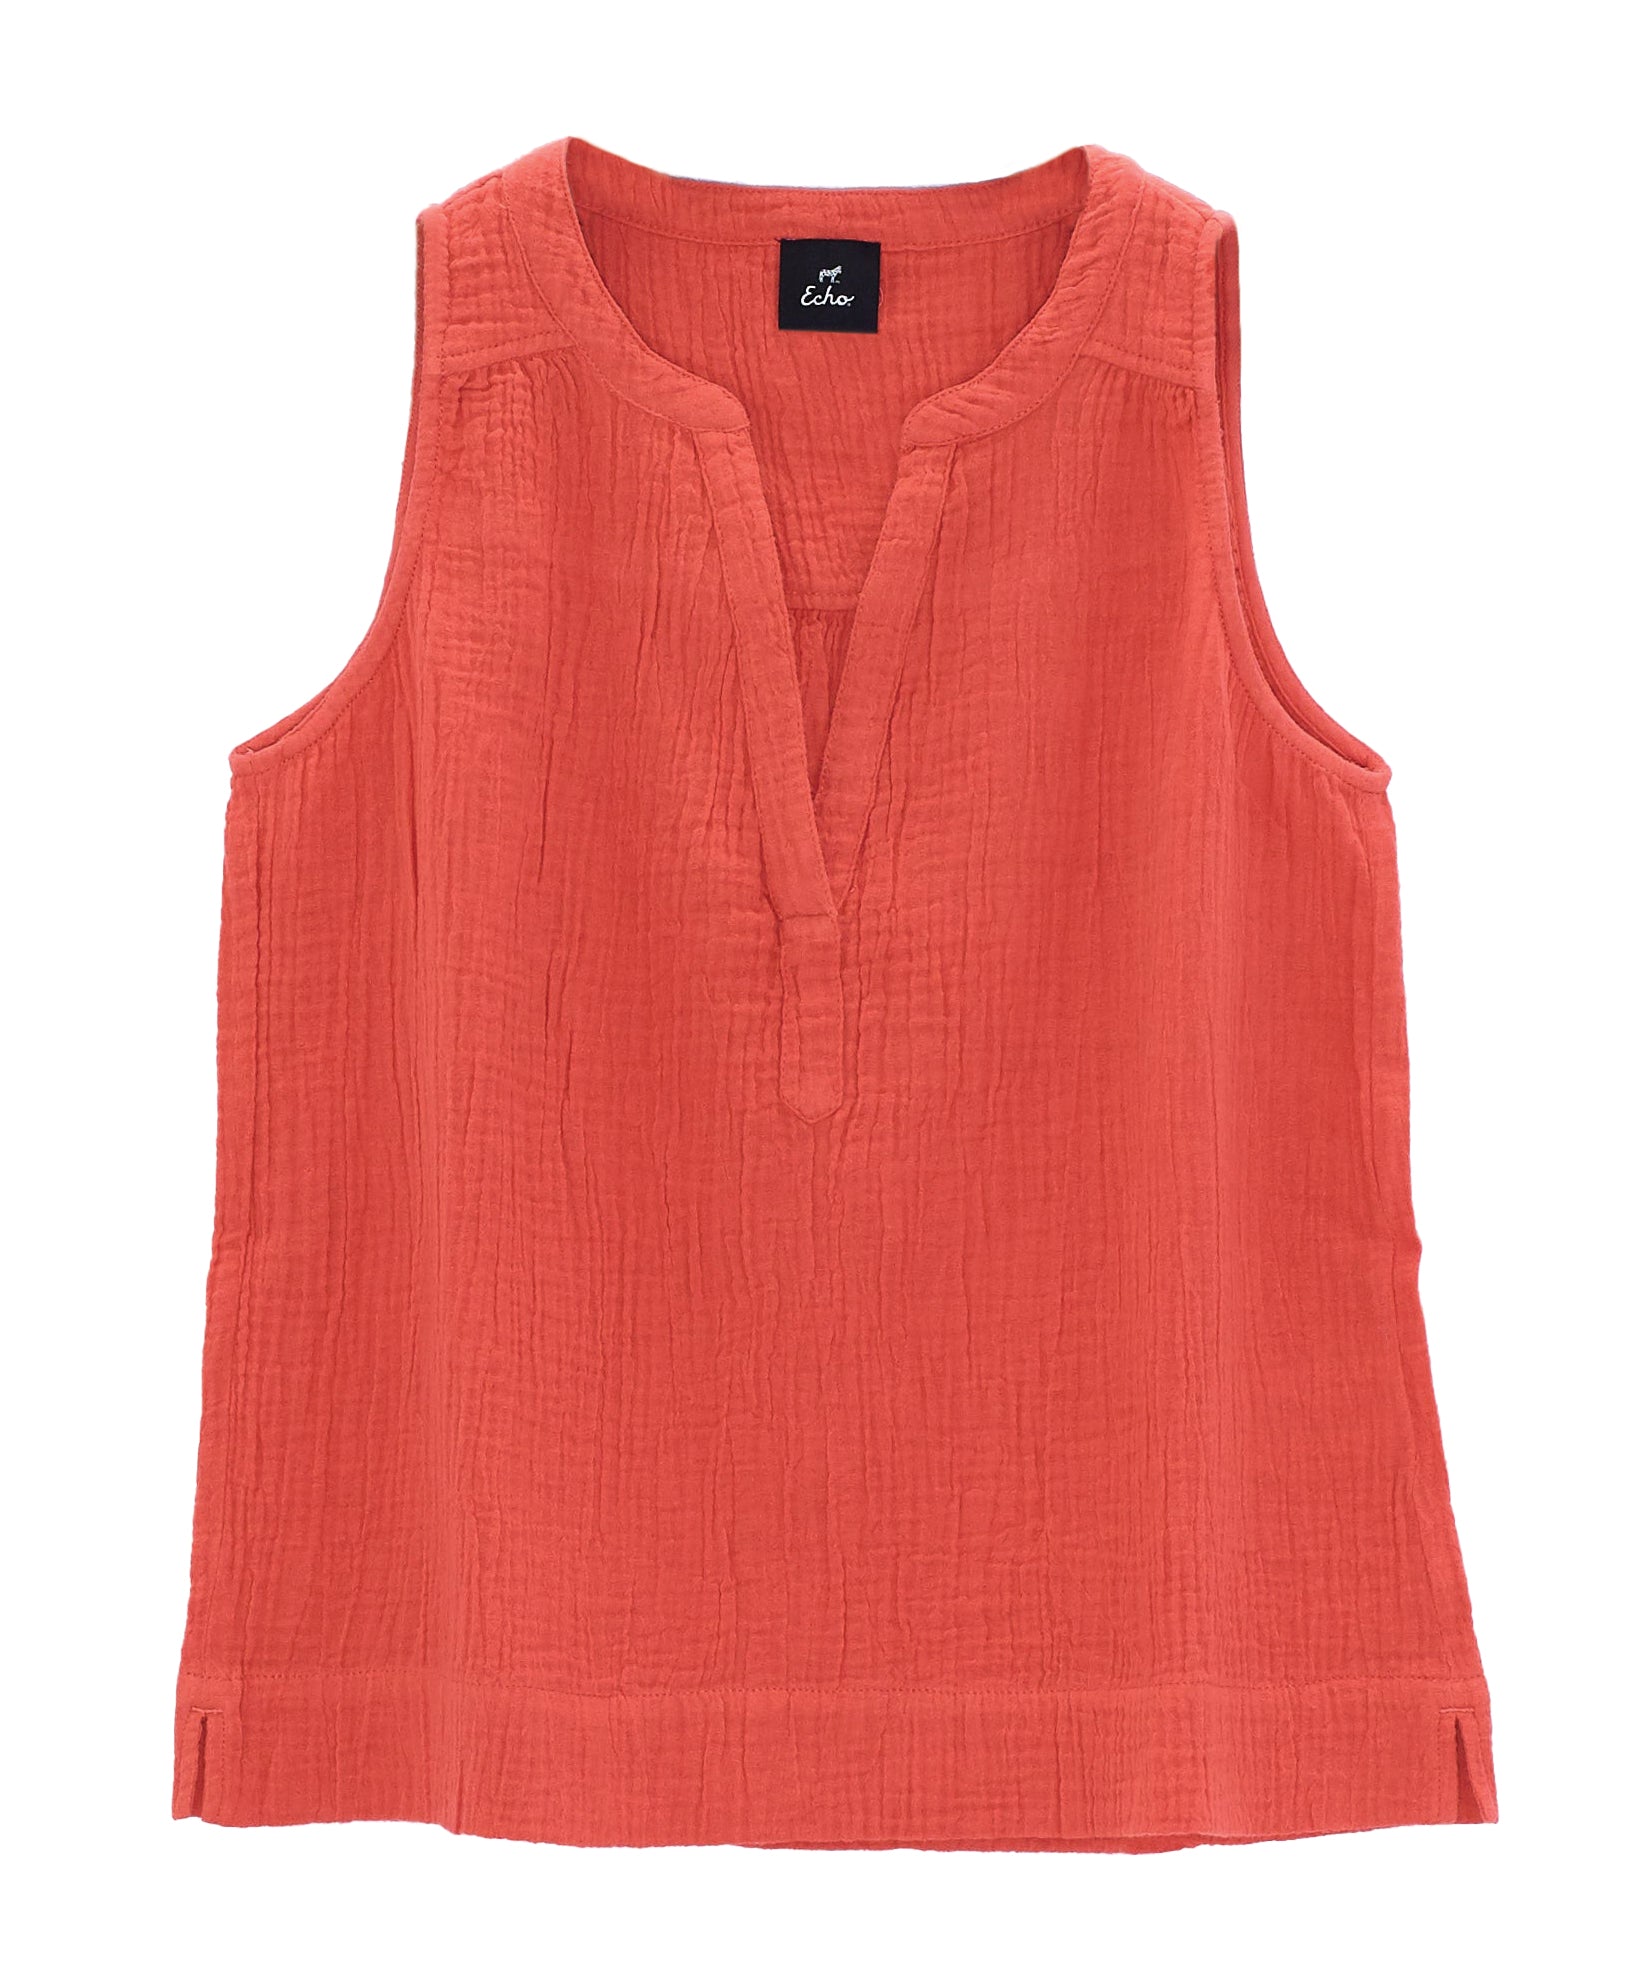 Double Gauze Sleeveless Top in color Emberglow